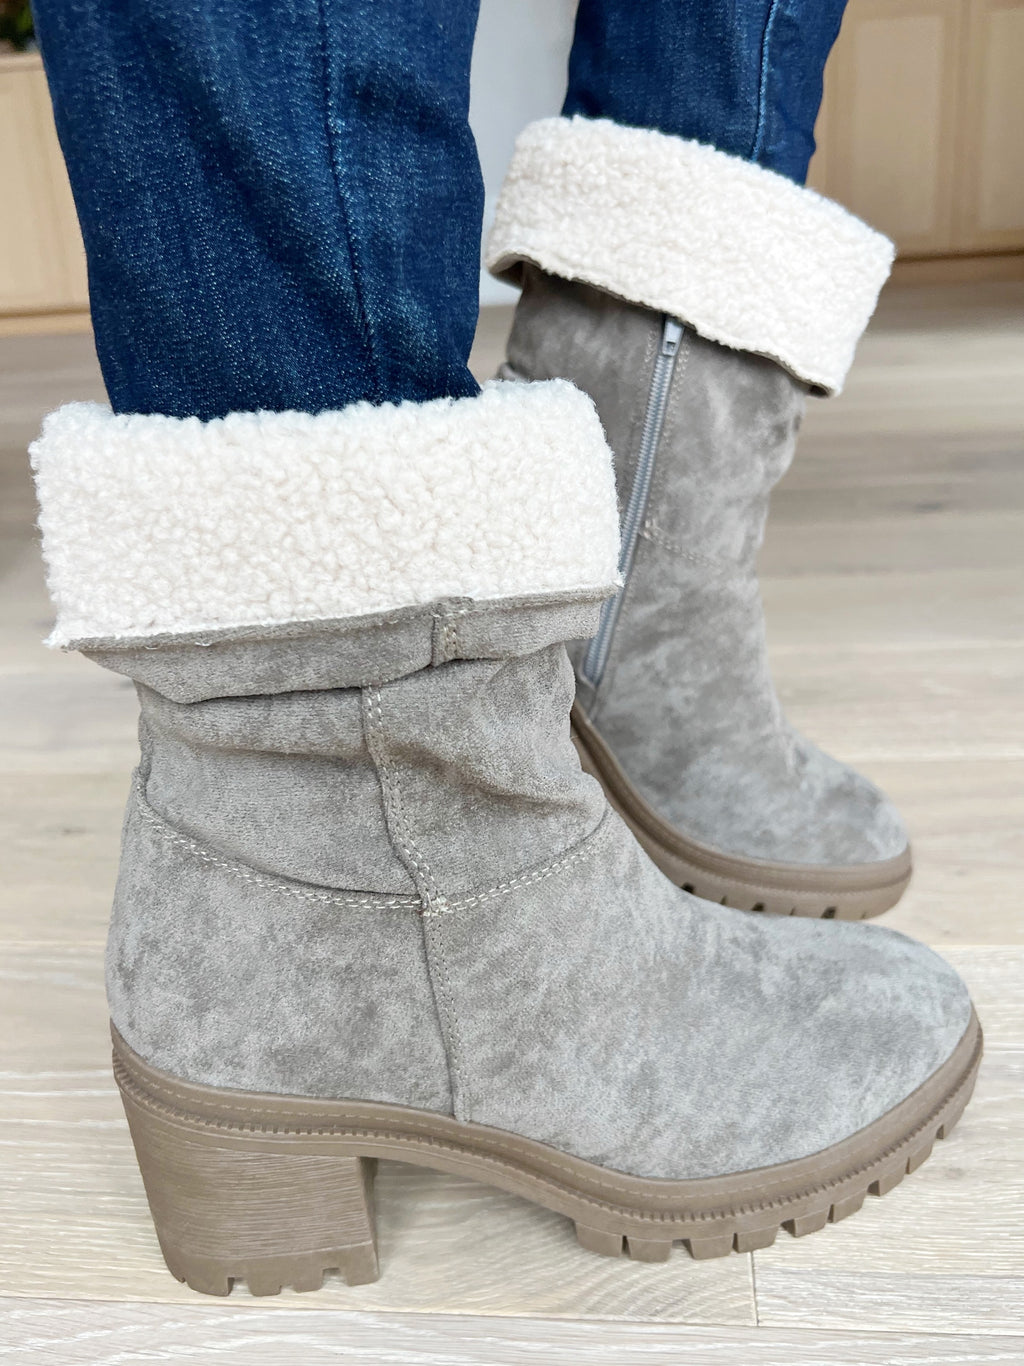 Very G Adventurer Snuggy Boots in Gray